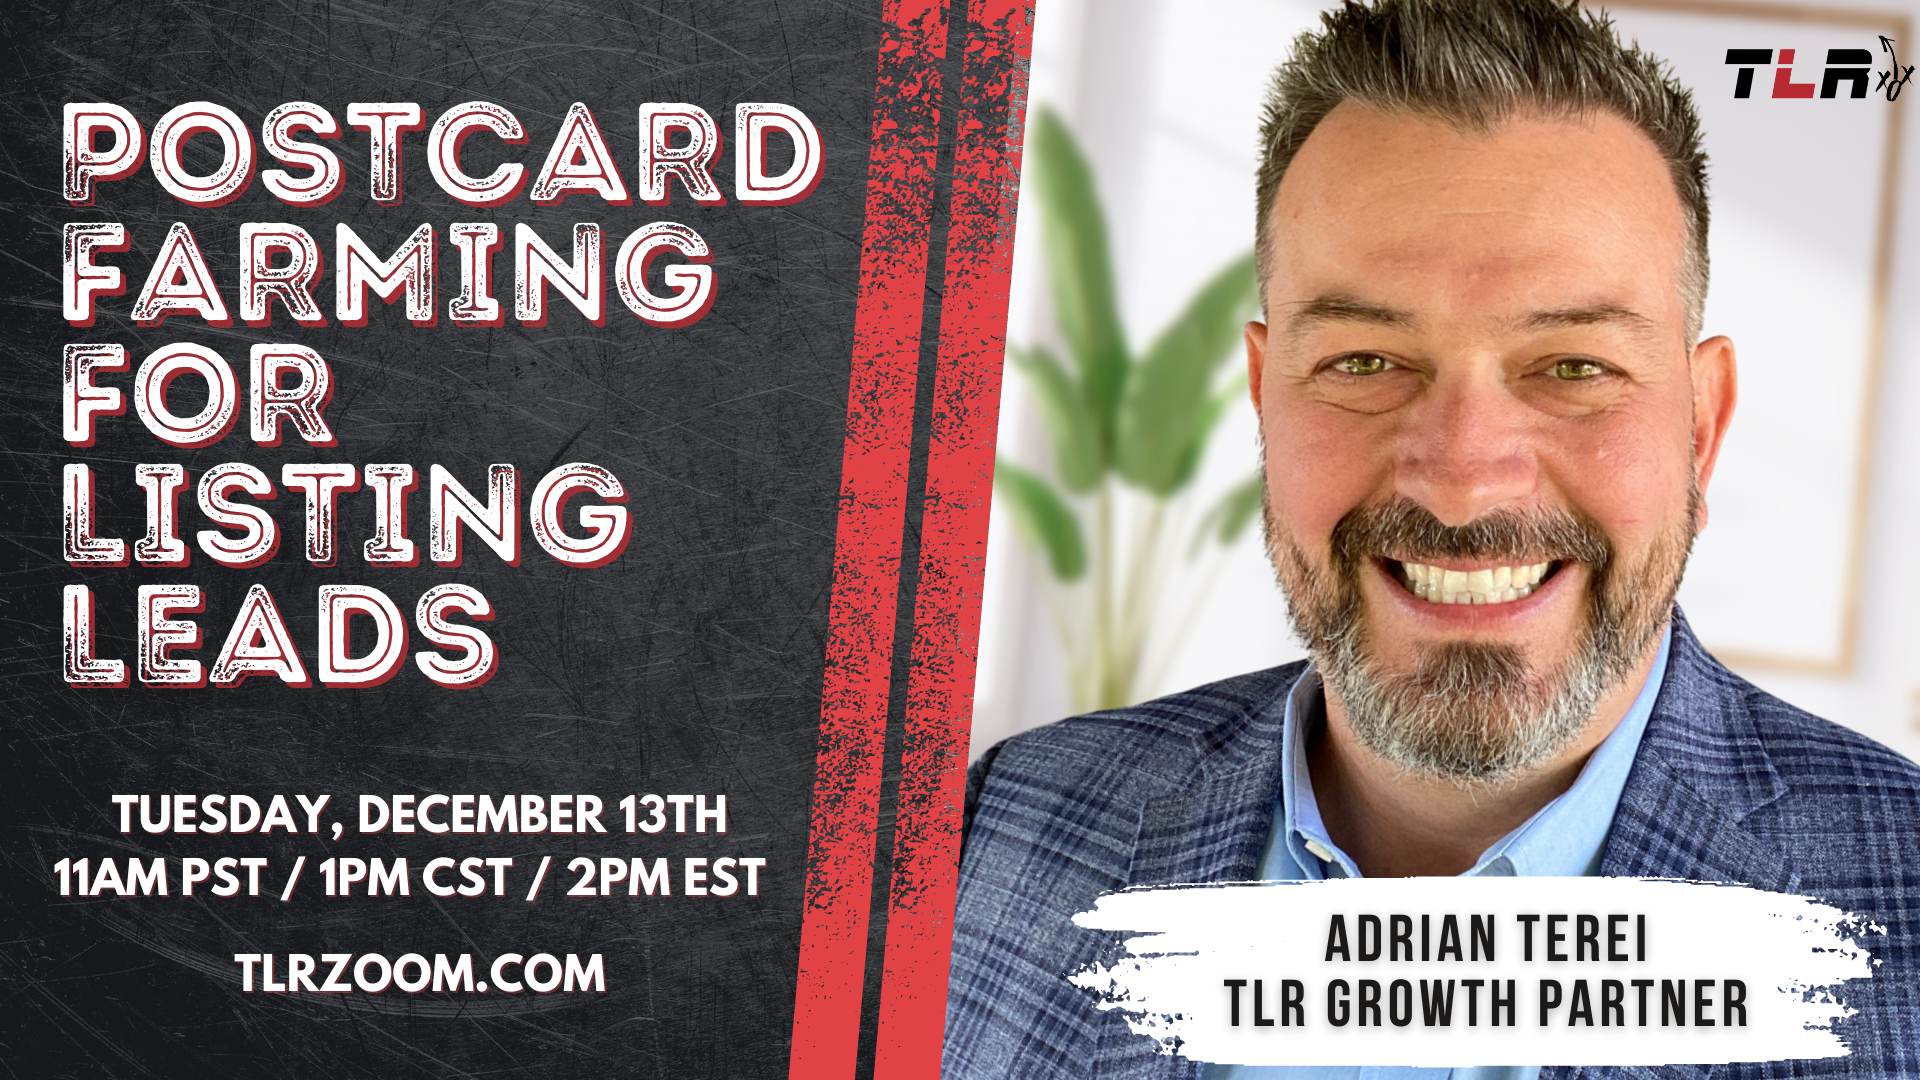 
TLR: Postcard Farming for Listing Leads